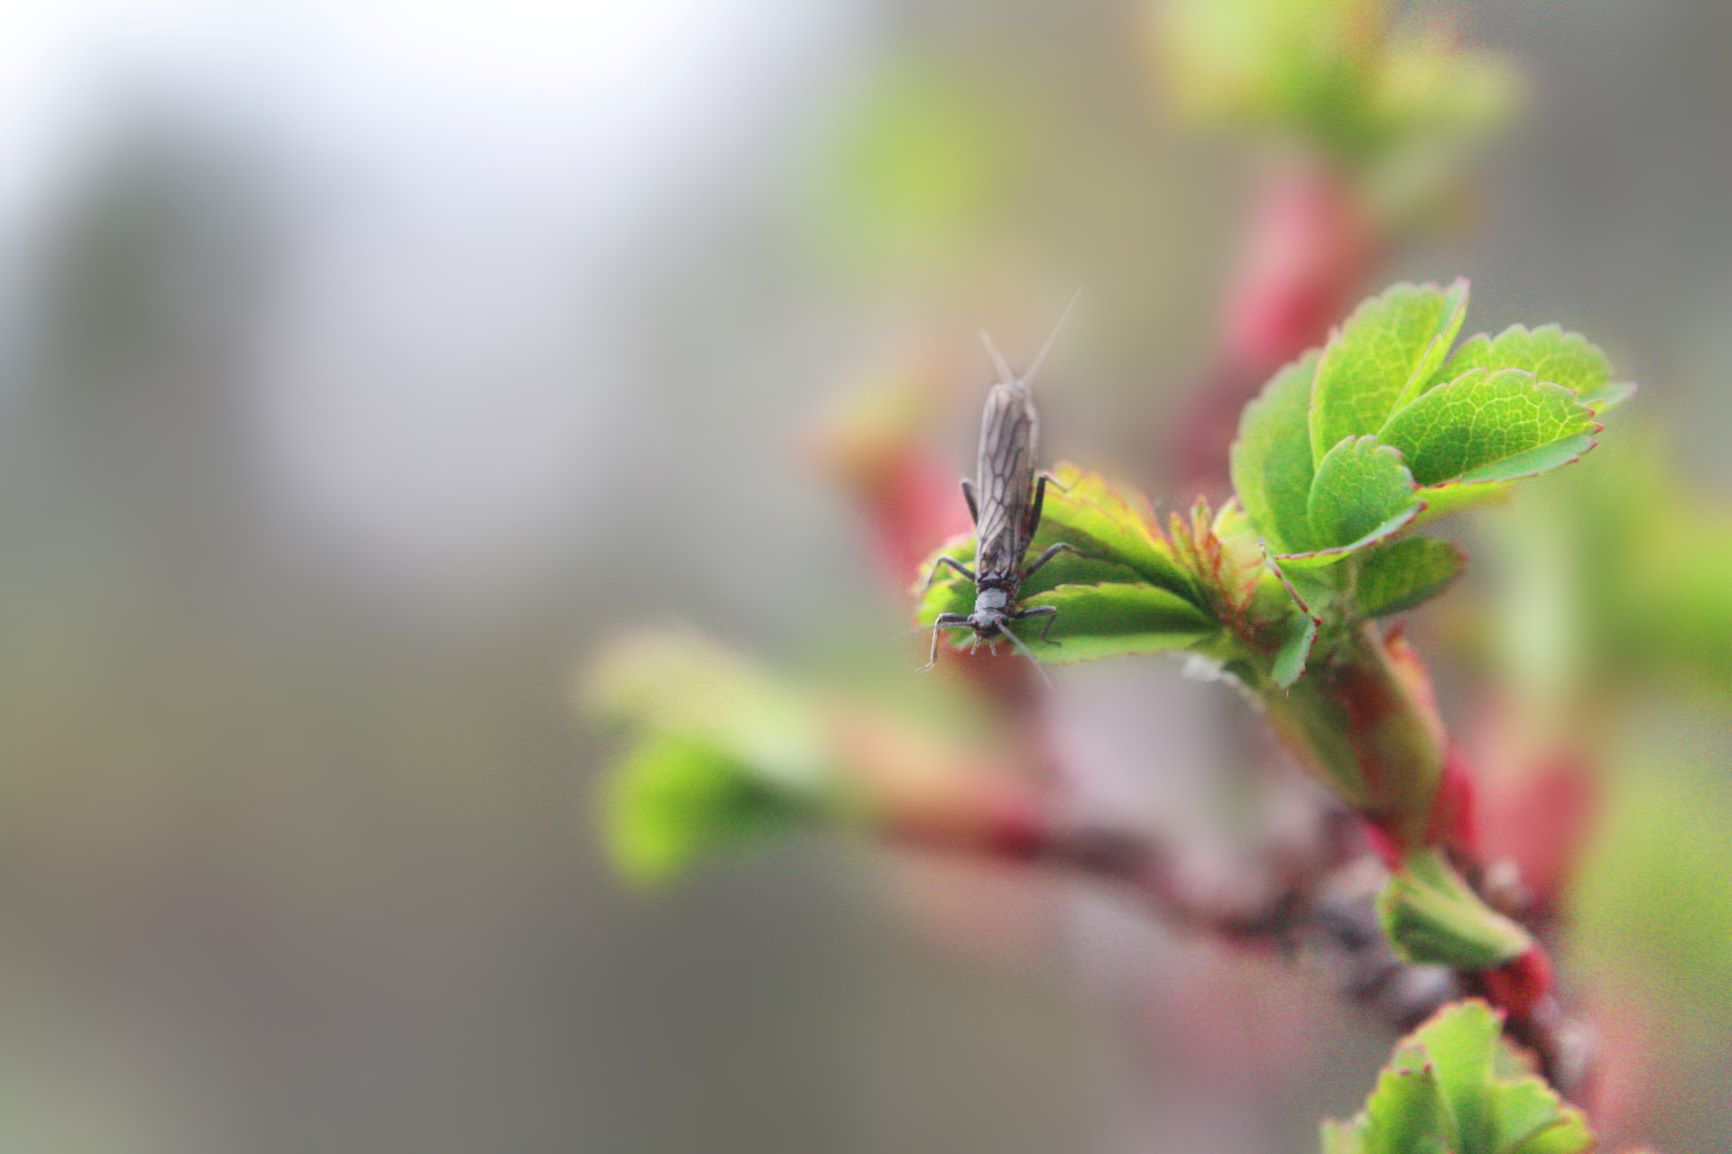 Small Bug on Leaf Buds, photograph by Emma D Fallon